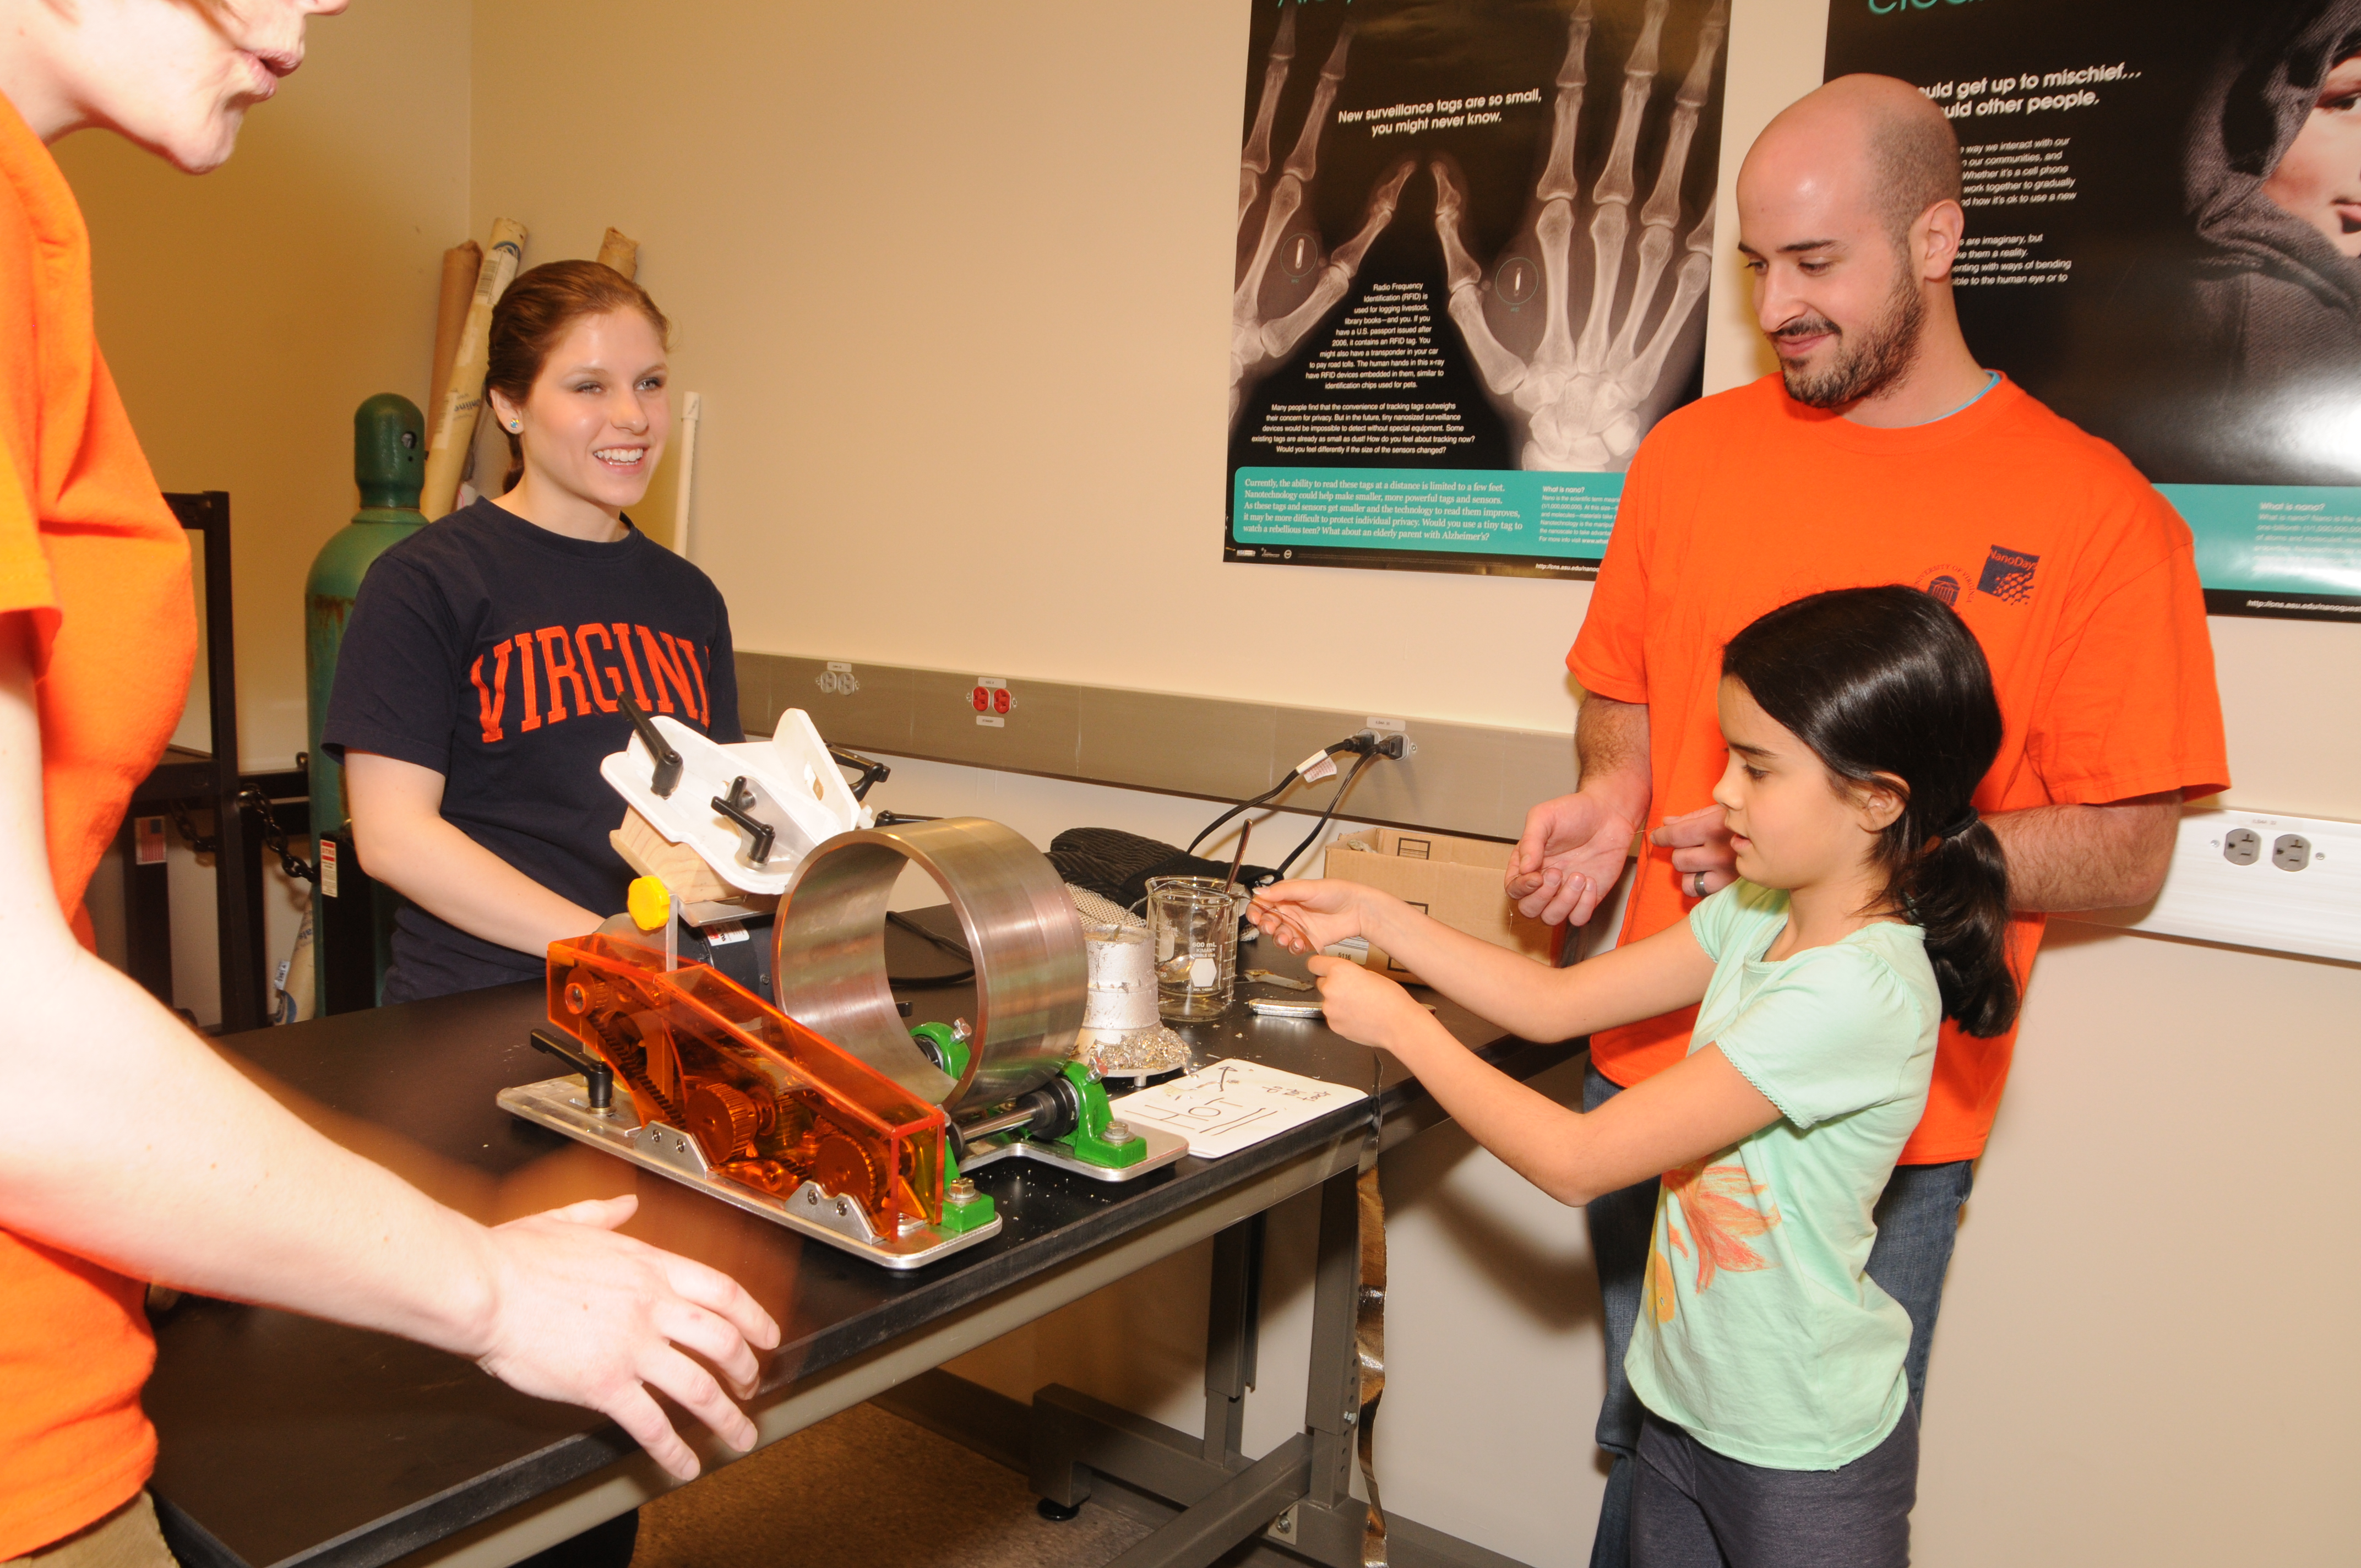 A small child works with a hands on engineering project while UVA students watch